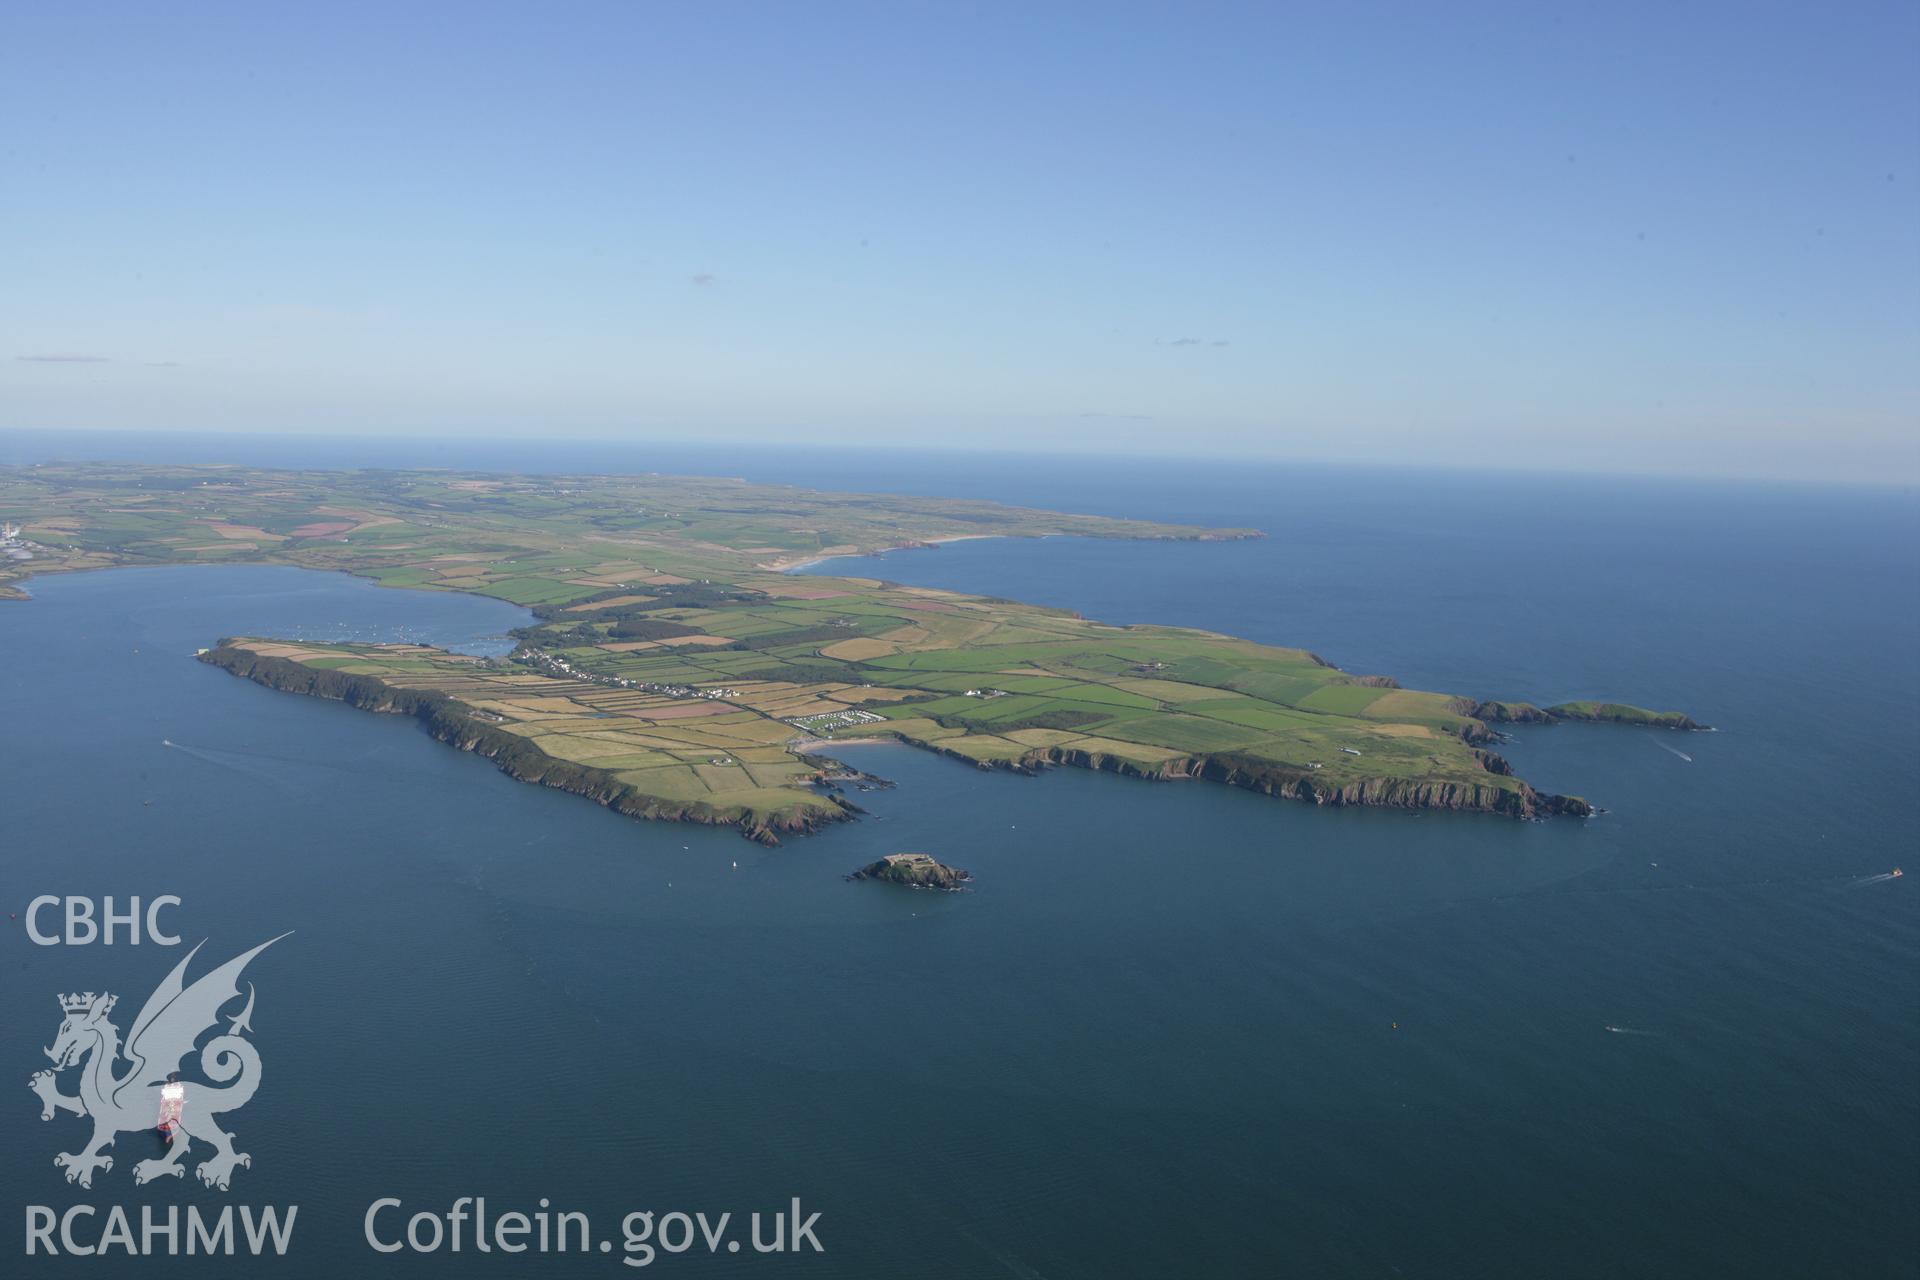 RCAHMW colour oblique aerial photograph of Milford Haven Waterway, looking east to Angle. Taken on 30 July 2007 by Toby Driver